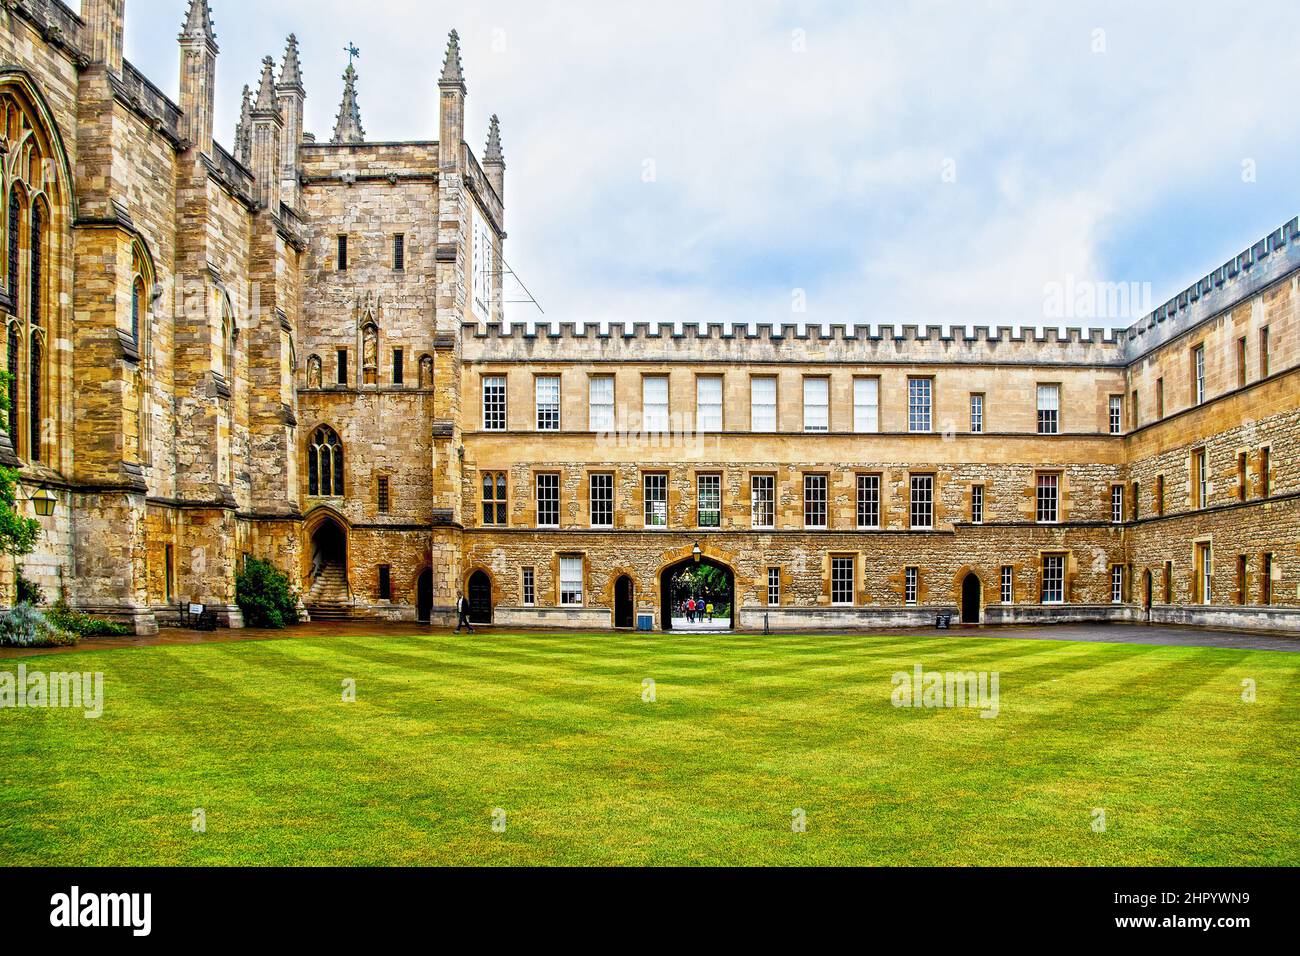 07-2019 Oxford UK - The New College quad with criscross mowed grass and some students going through arch on pretty summer day at Oxford University. Stock Photo